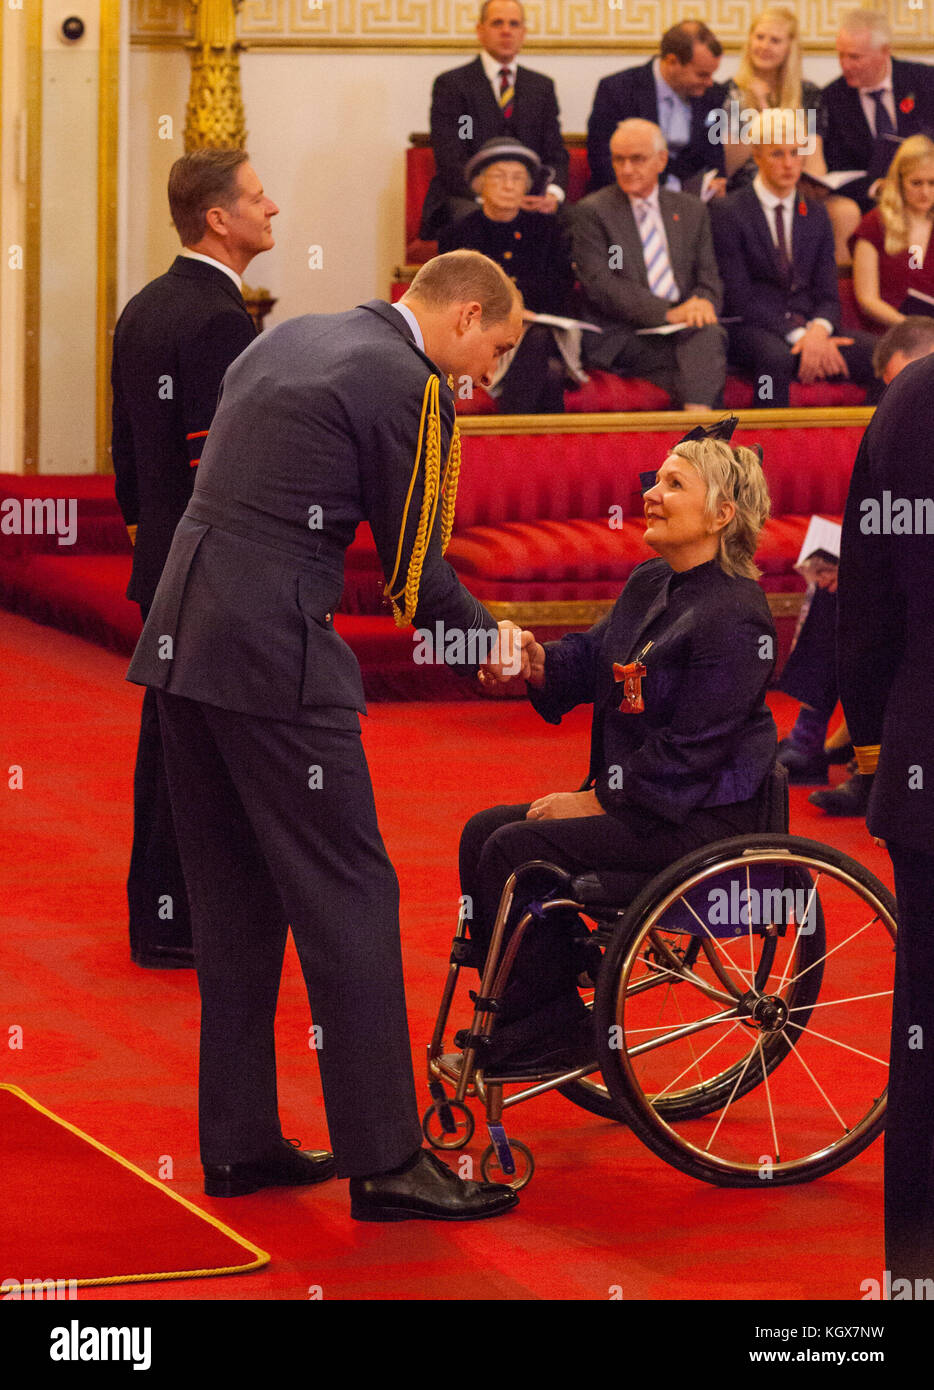 Angela Malone from Glasgow is made an MBE (Member of the Order of the British Empire) by the Duke of Cambridge at Buckingham Palace. Stock Photo